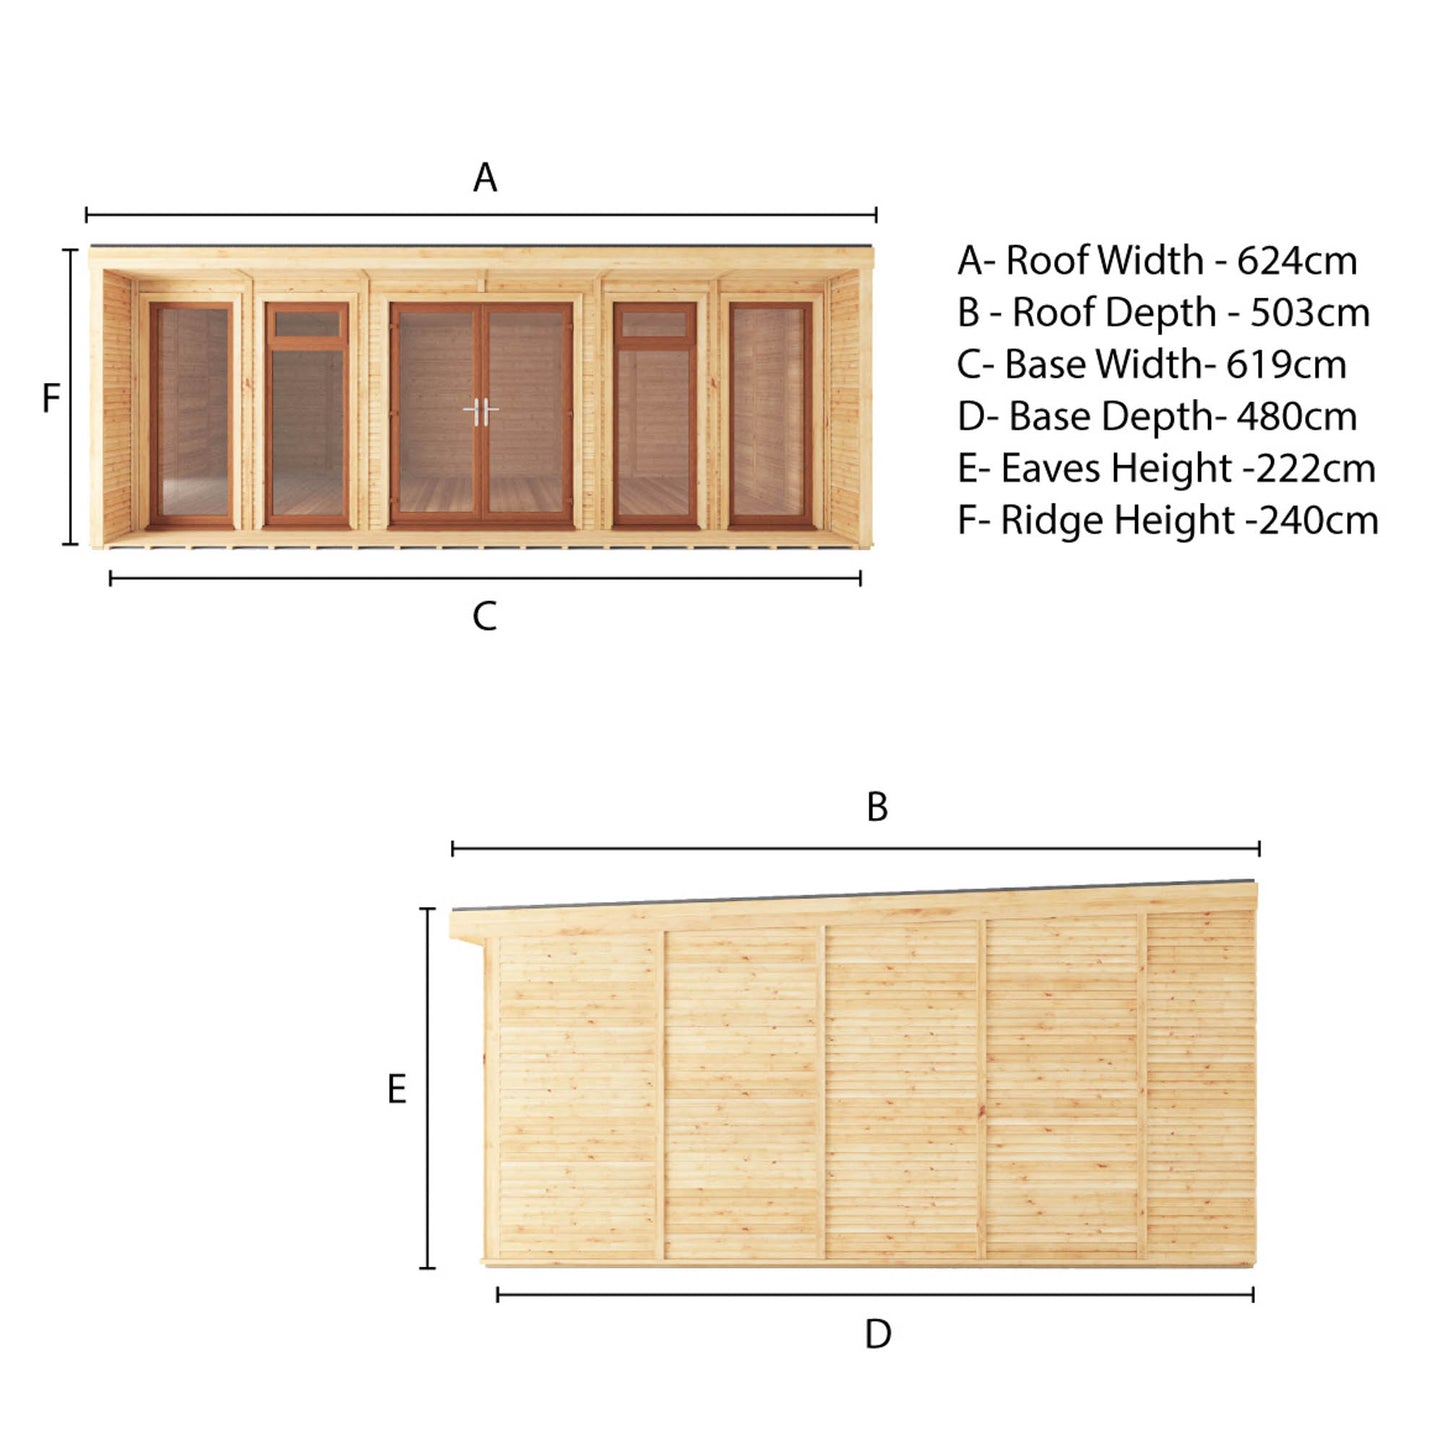 The Creswell 6m x 4m Premium Insulated Garden Room with Oak UPVC